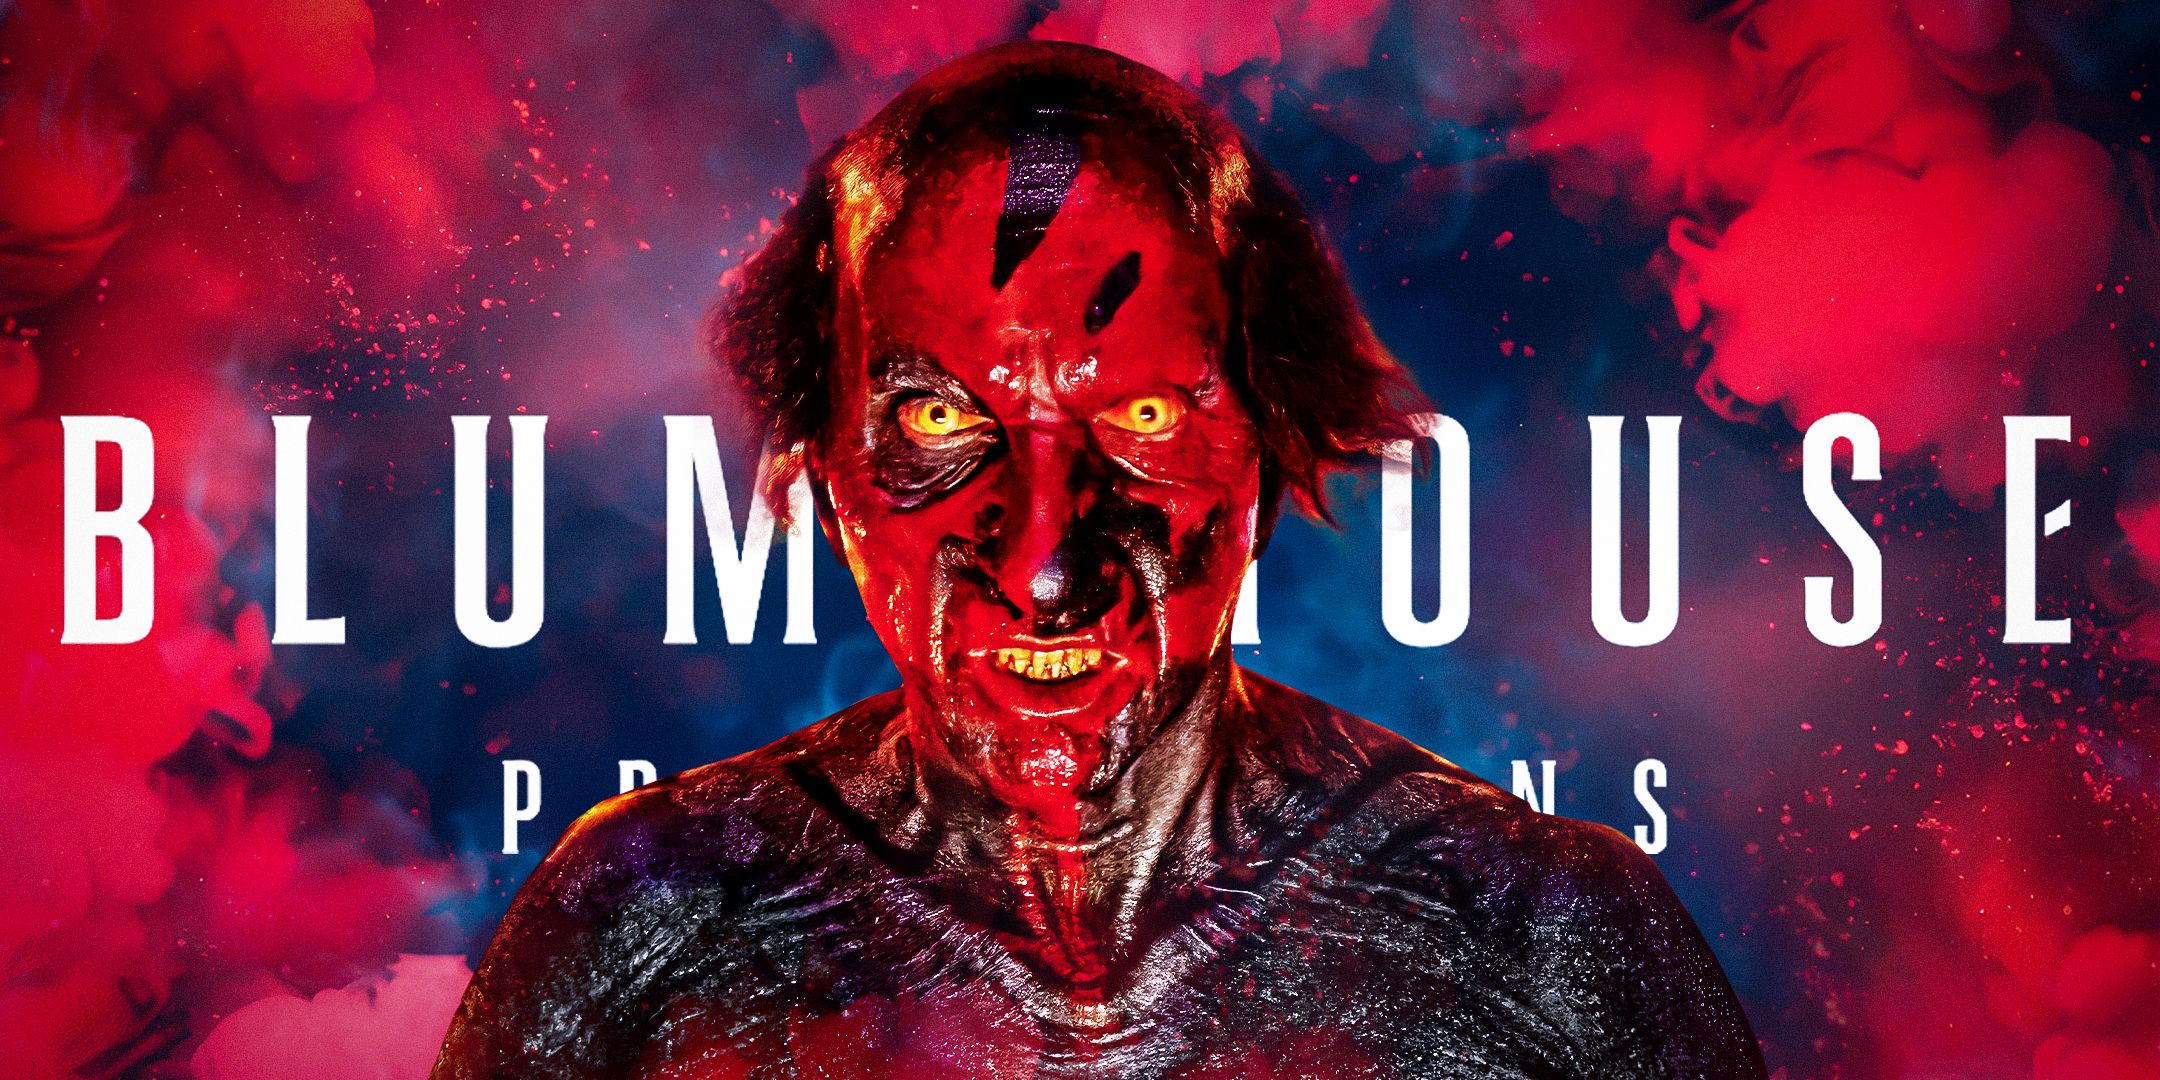 The-Lipstick-Face-Demon-from-The-Insidious-Franchise-and-The-Blumhouse-logo